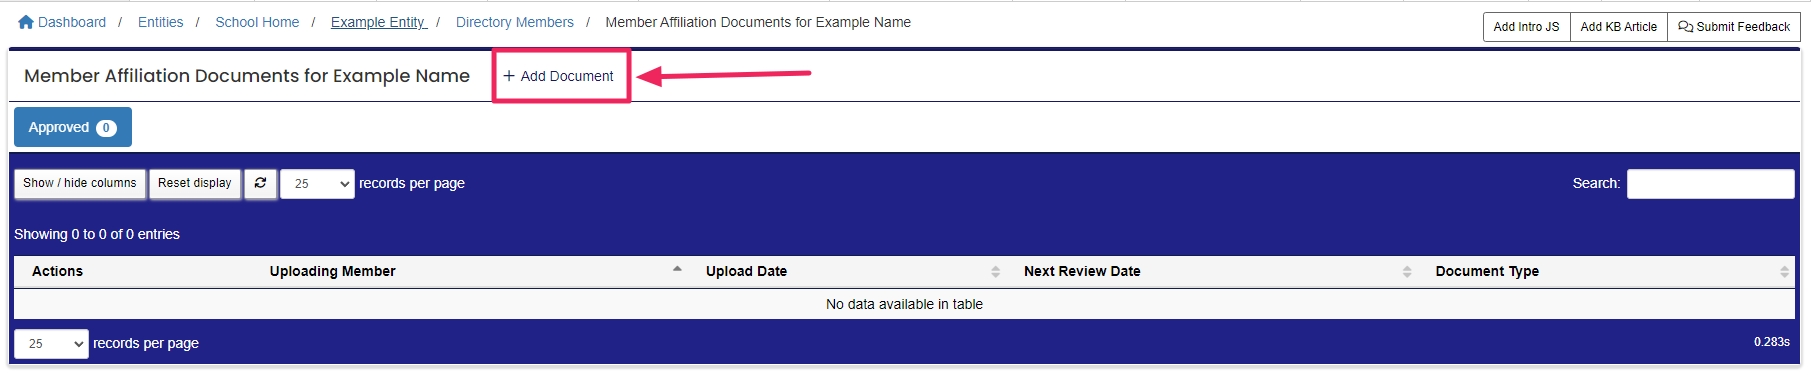 Member Documents table highlighting "+ Add Document" button